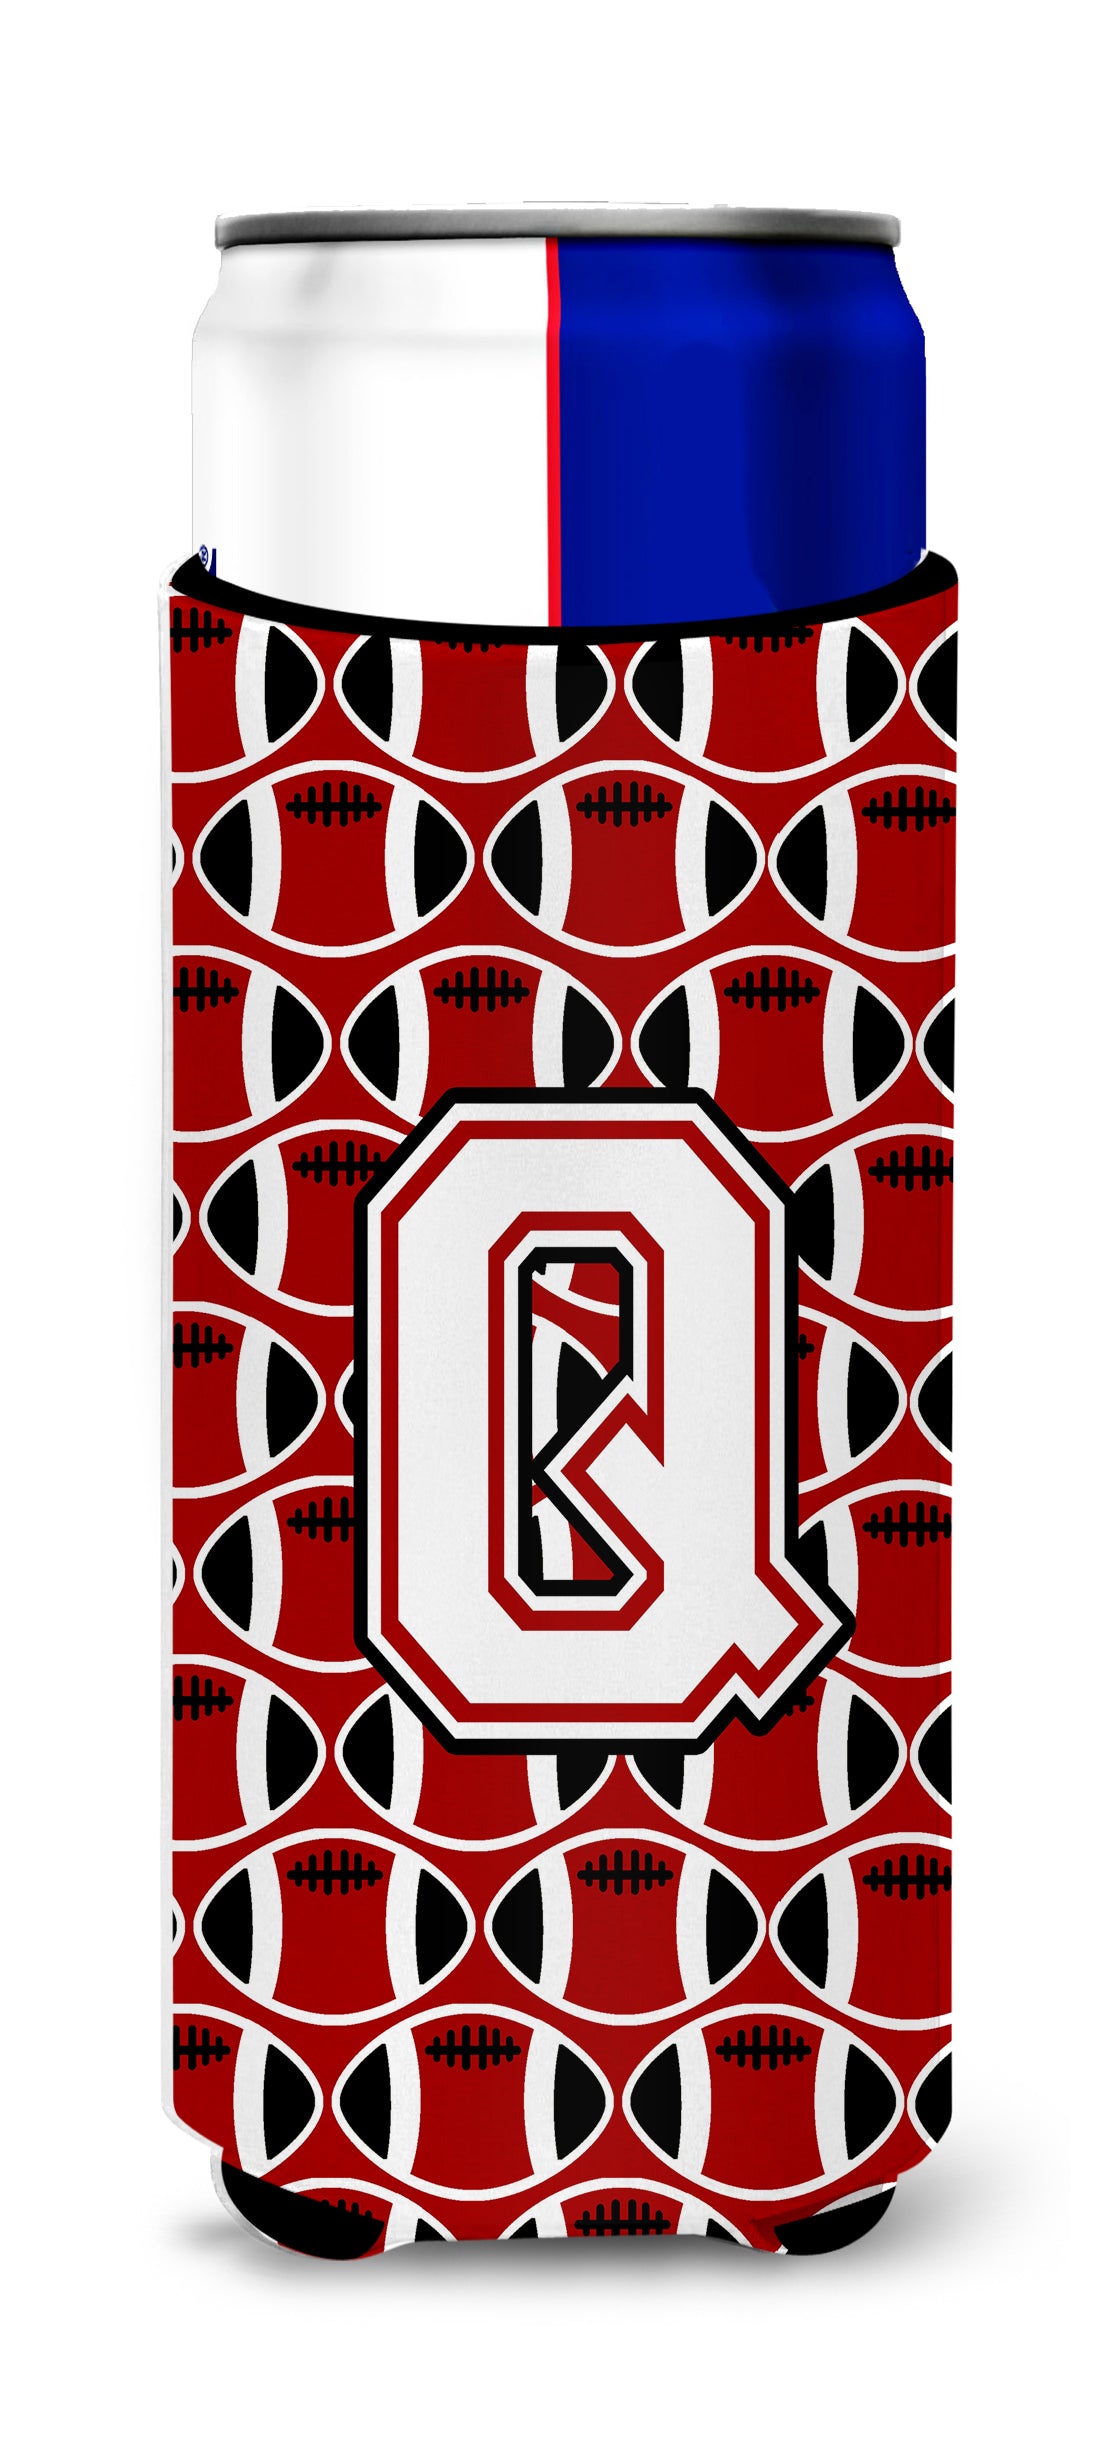 Letter Q Football Cardinal and White Ultra Beverage Insulators for slim cans CJ1082-QMUK.